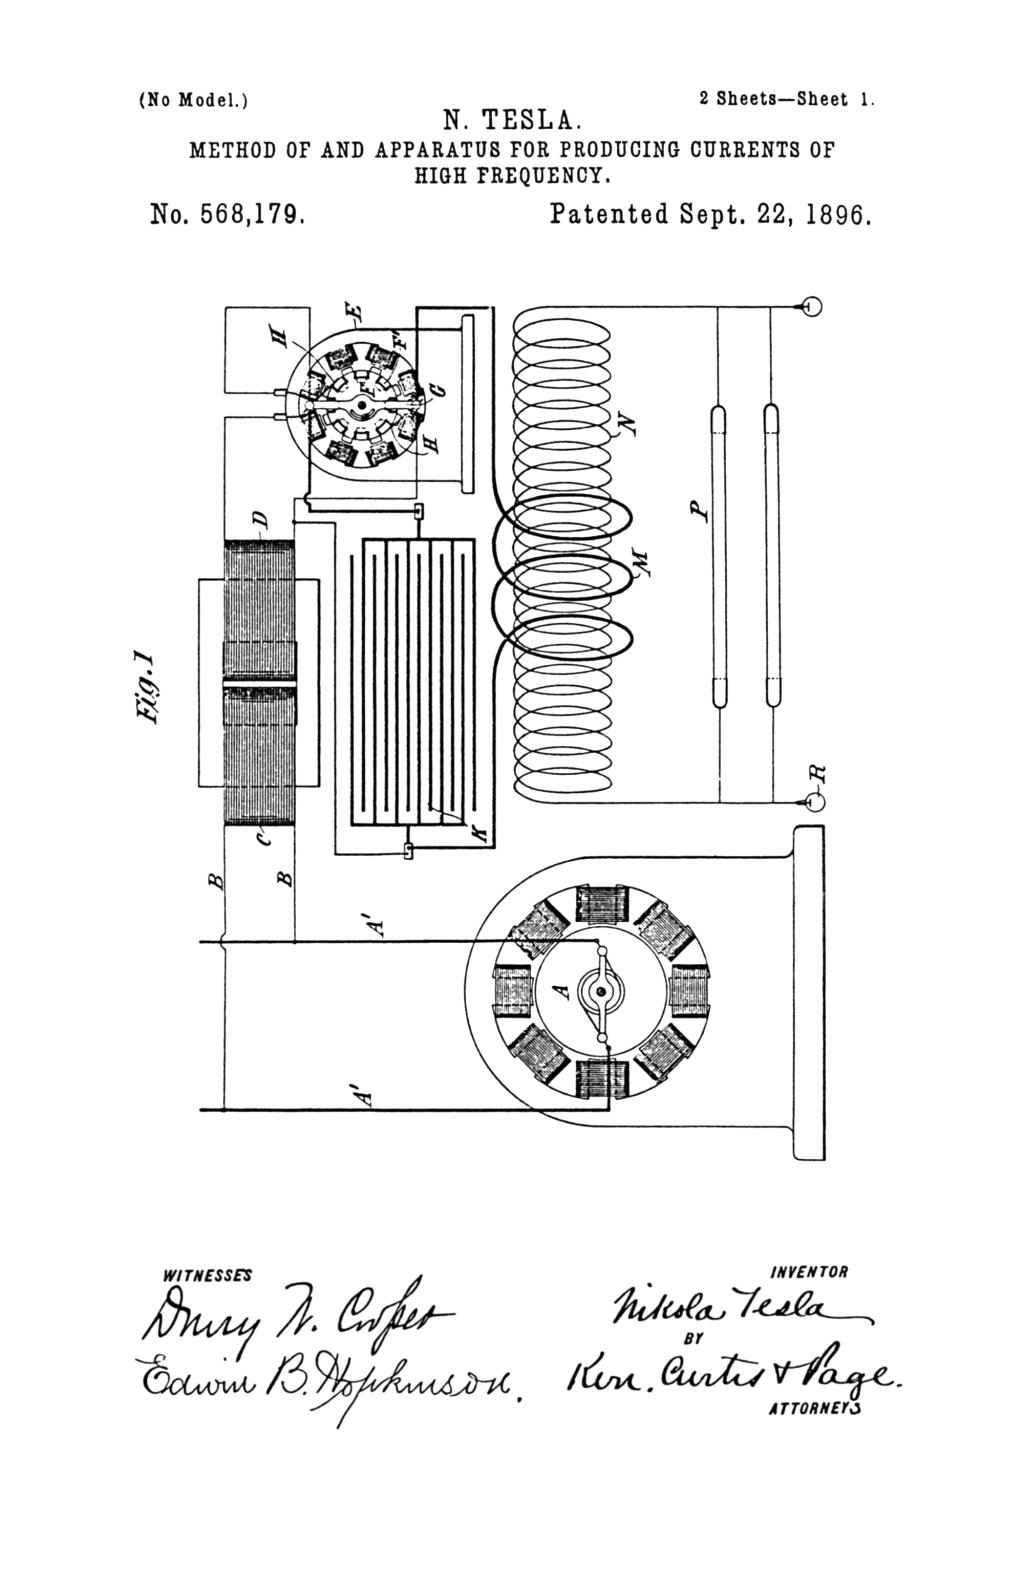 Nikola Tesla U.S. Patent 568,179 - Method of and Apparatus for Producing Currents of High Frequency - Image 1